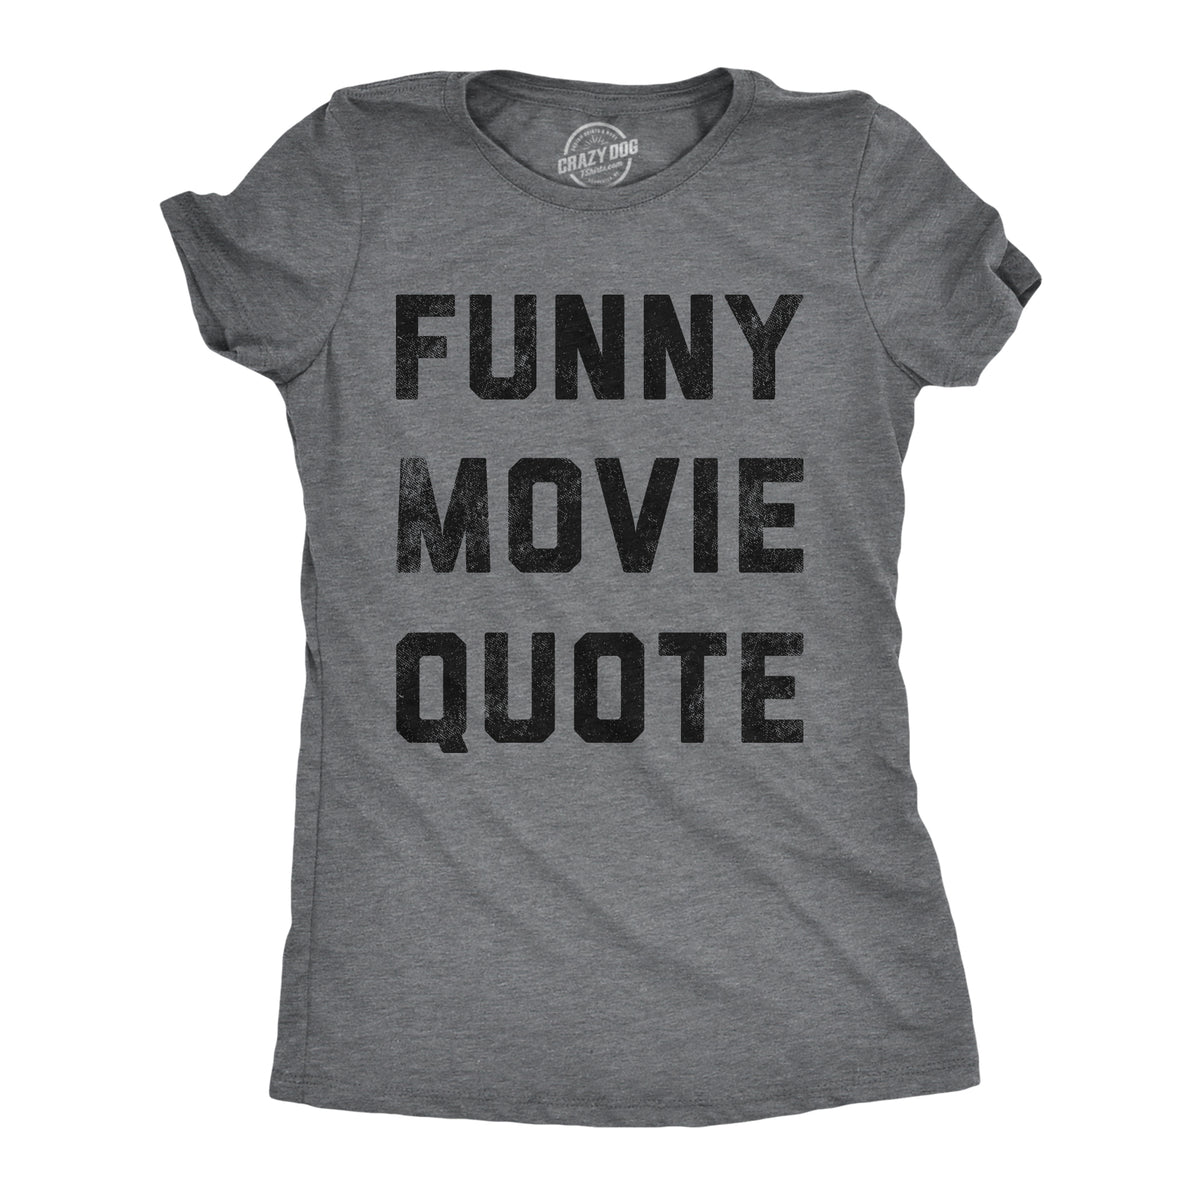 Funny Dark Heather Grey - Funny Movie Quote Funny Movie Quote Womens T Shirt Nerdy TV &amp; Movies sarcastic Tee